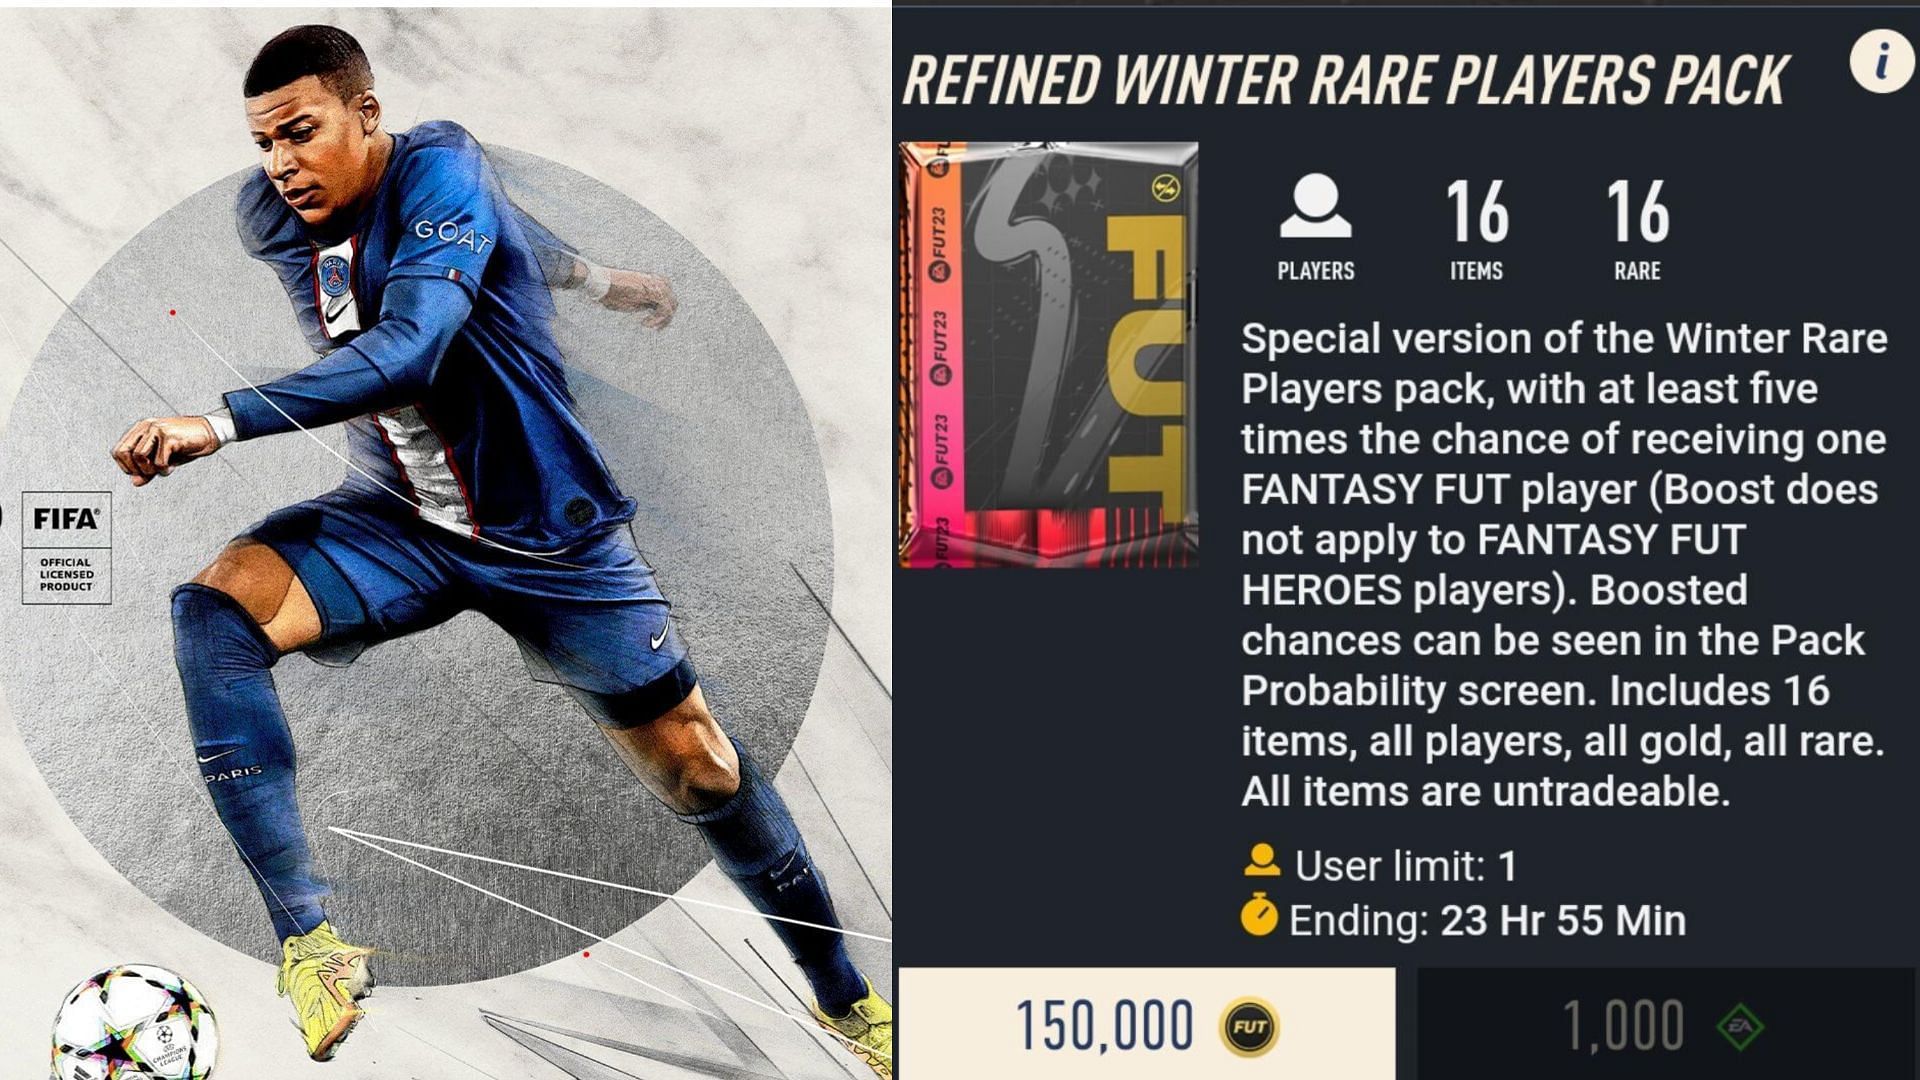 The Refined Winter Rare Players pack could land some great cards for FIFA 23 players (Images via EA Sports)